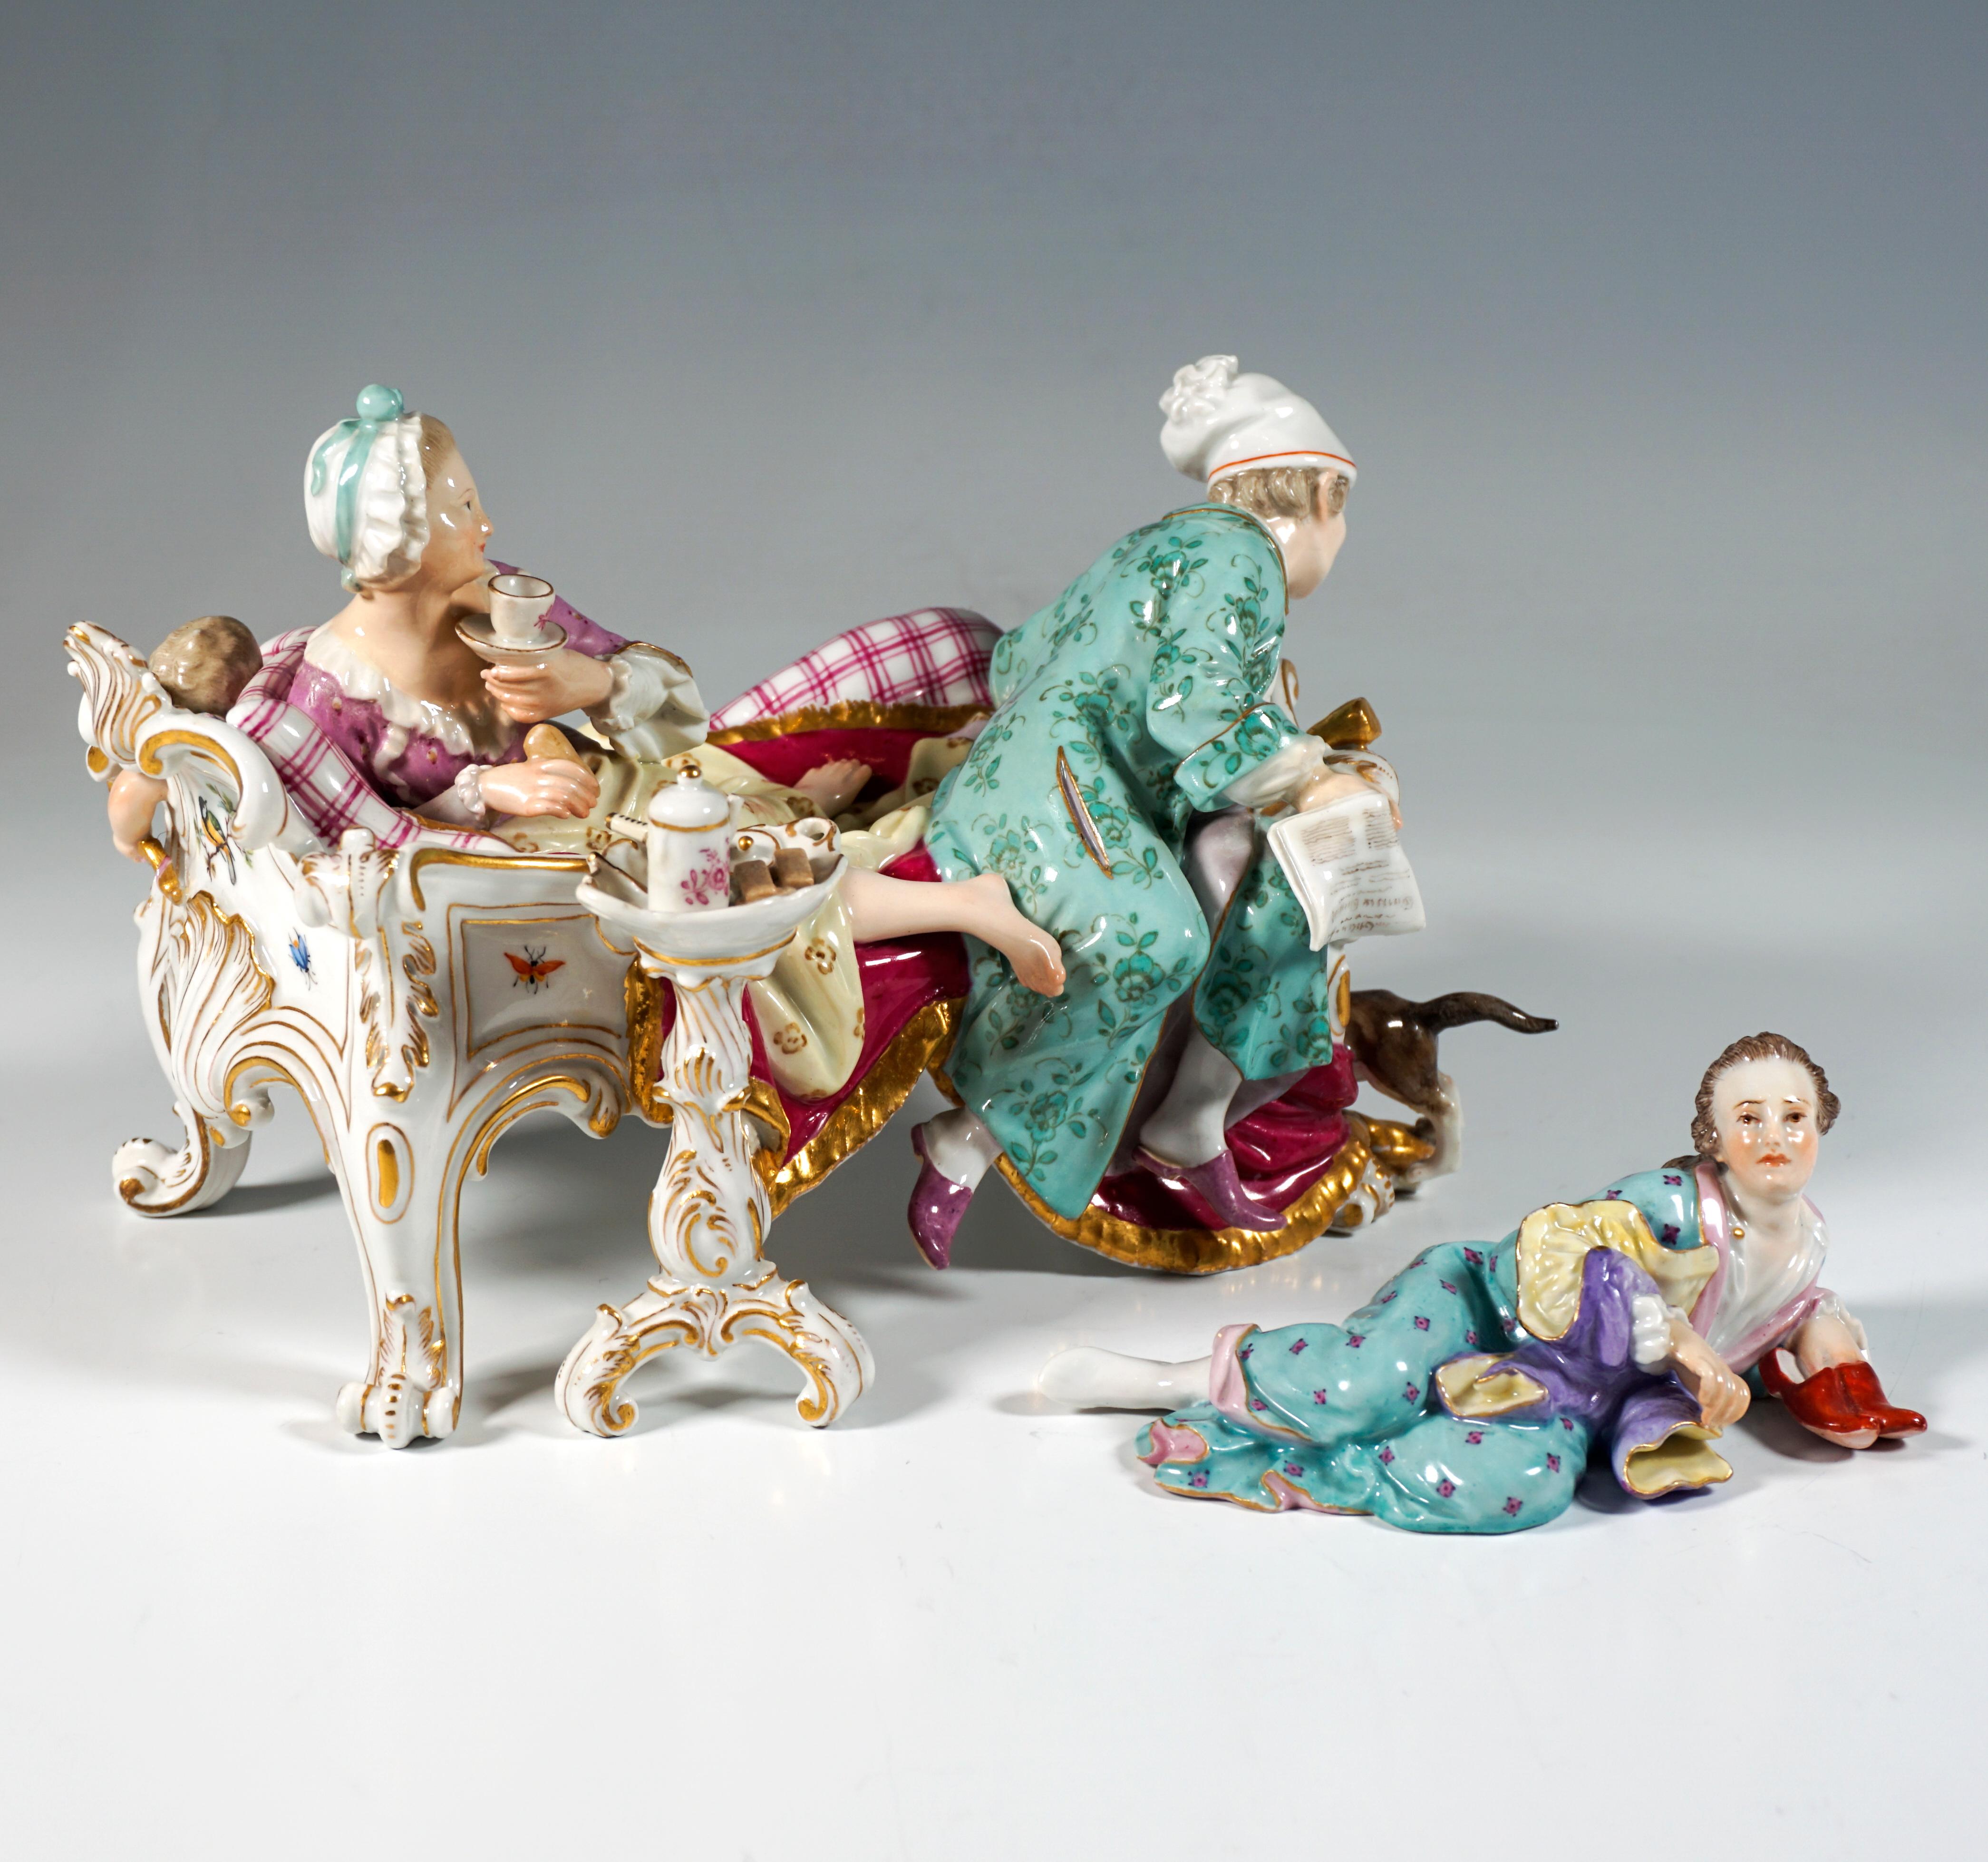 Hand-Crafted Meissen Genre Group 'The Discovered Lover', by J.J. Kaendler, Germany, ca 1850